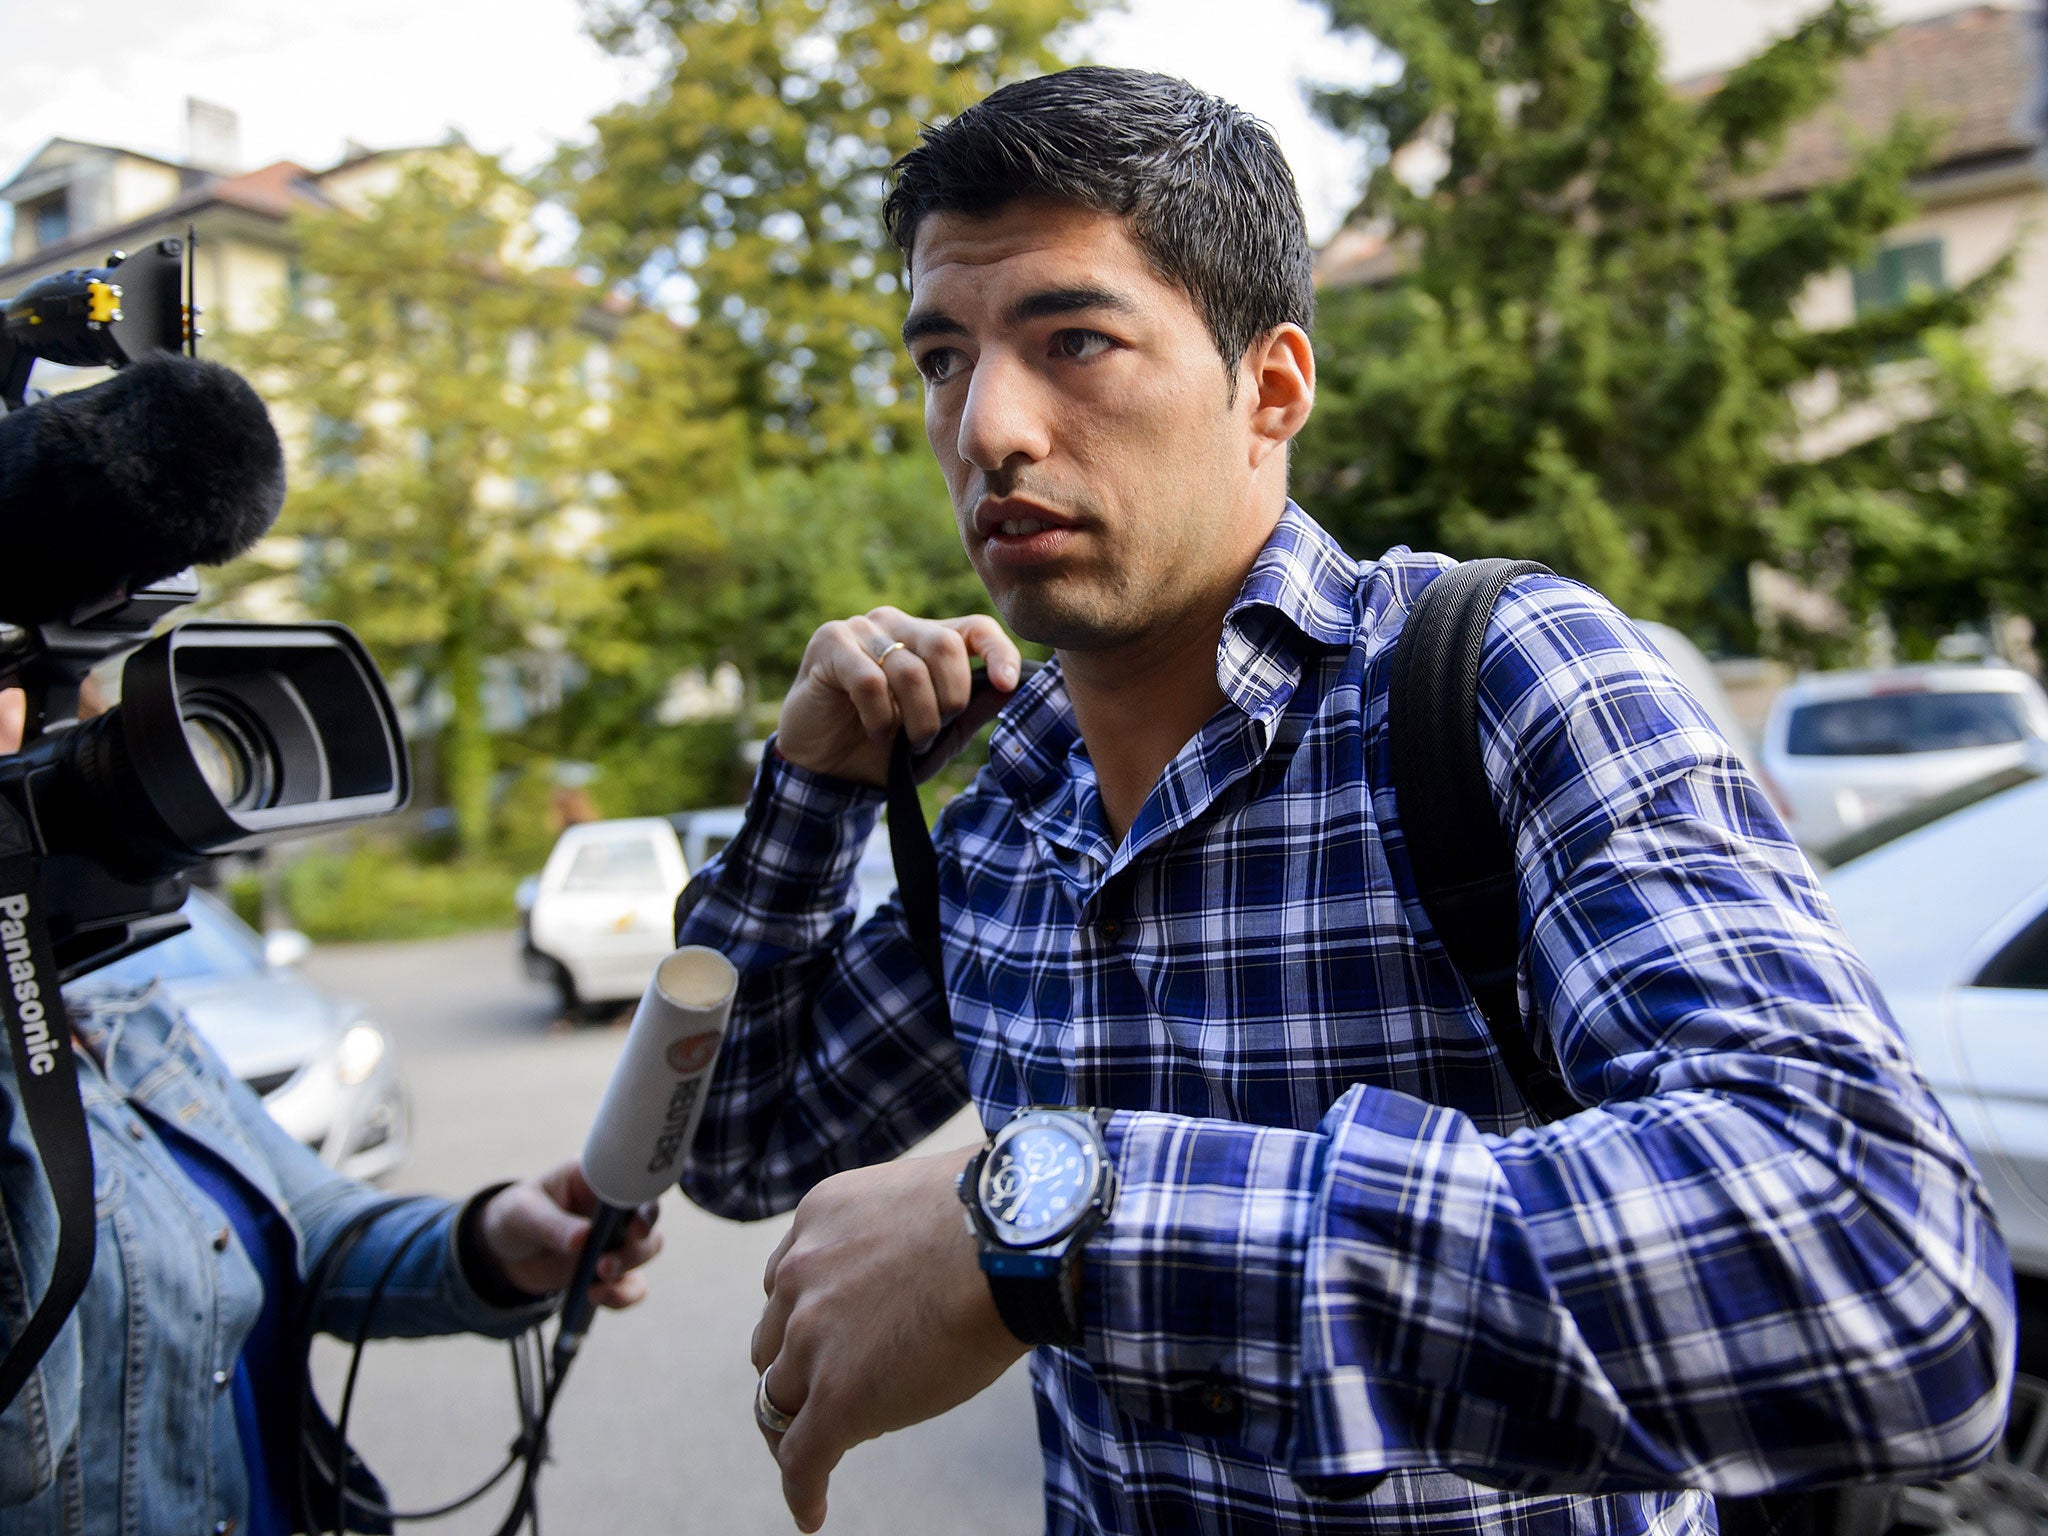 Luis Suarez arrives at the Court of Arbitration for Sport to argue his case over his four-month ban